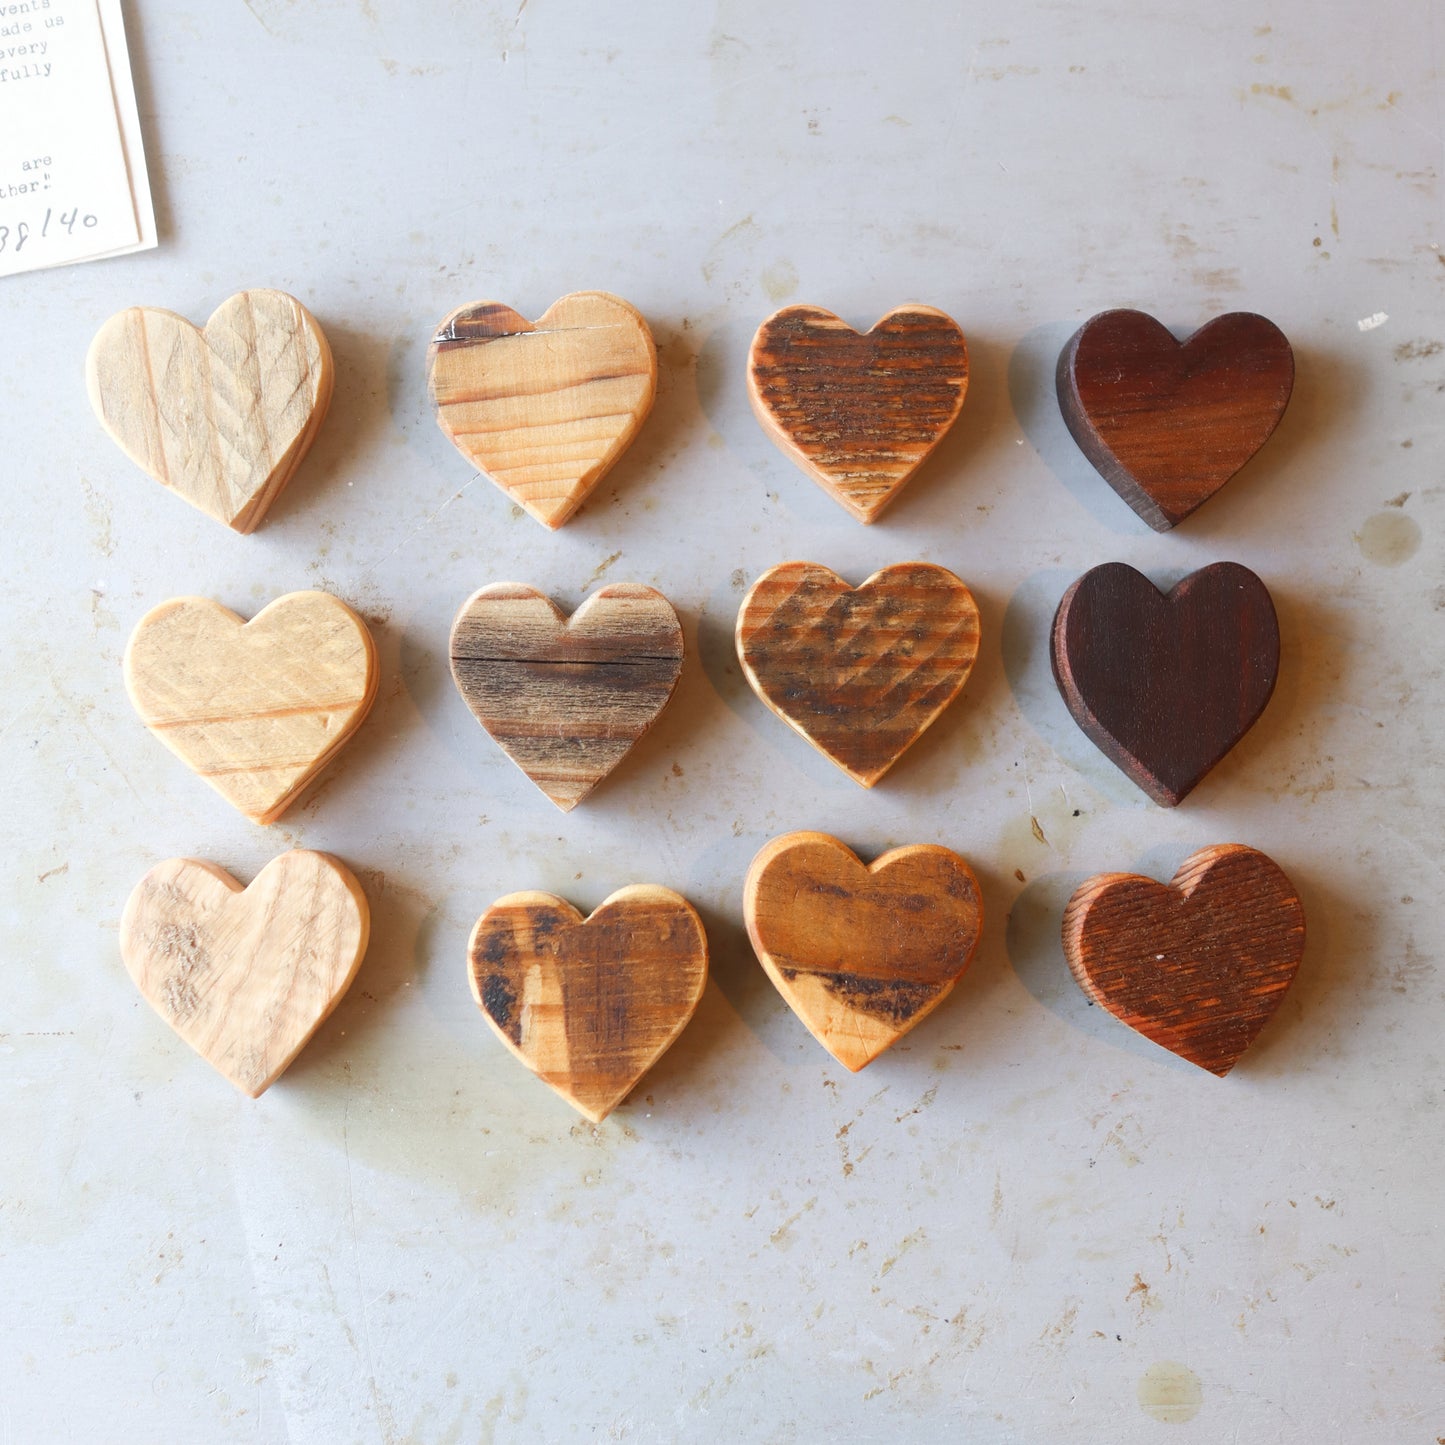 Imperfect Heart Collections